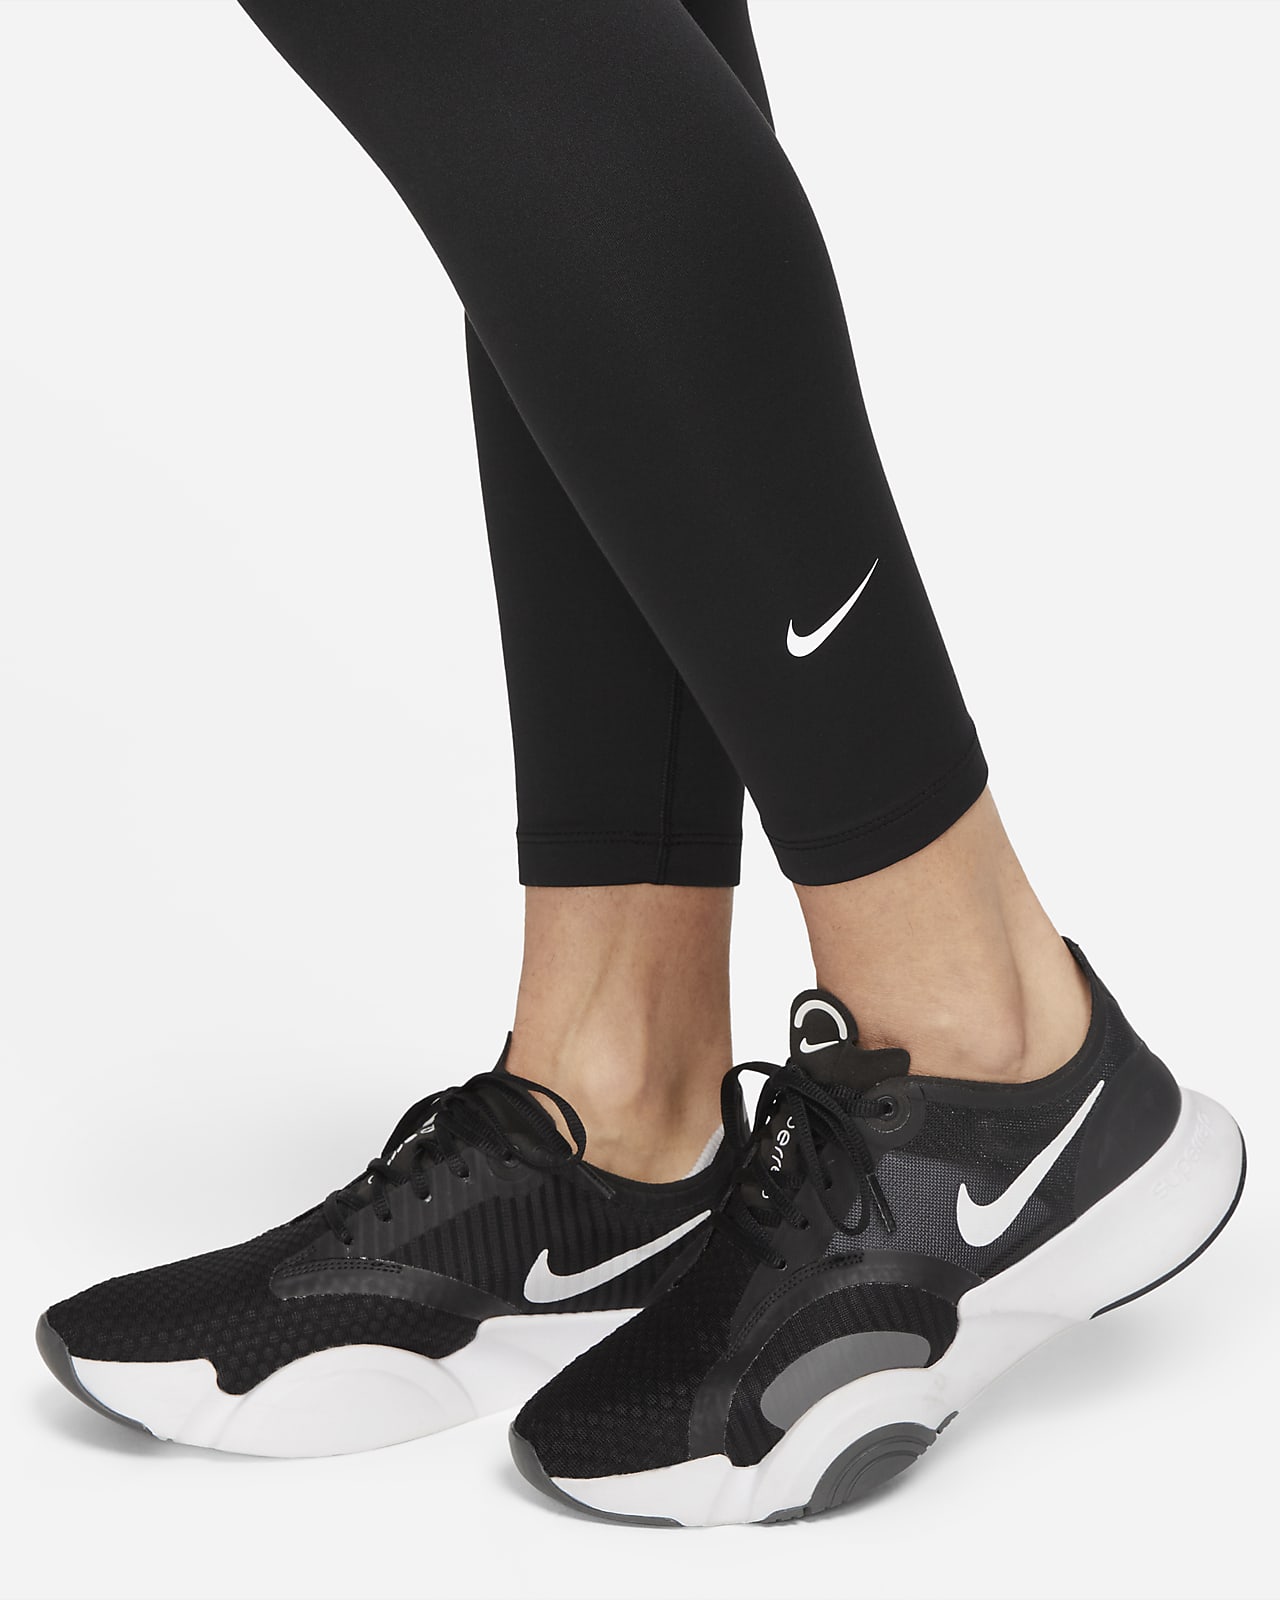 Nike Therma-FIT Women\'s Leggings. High-Waisted 7/8 One